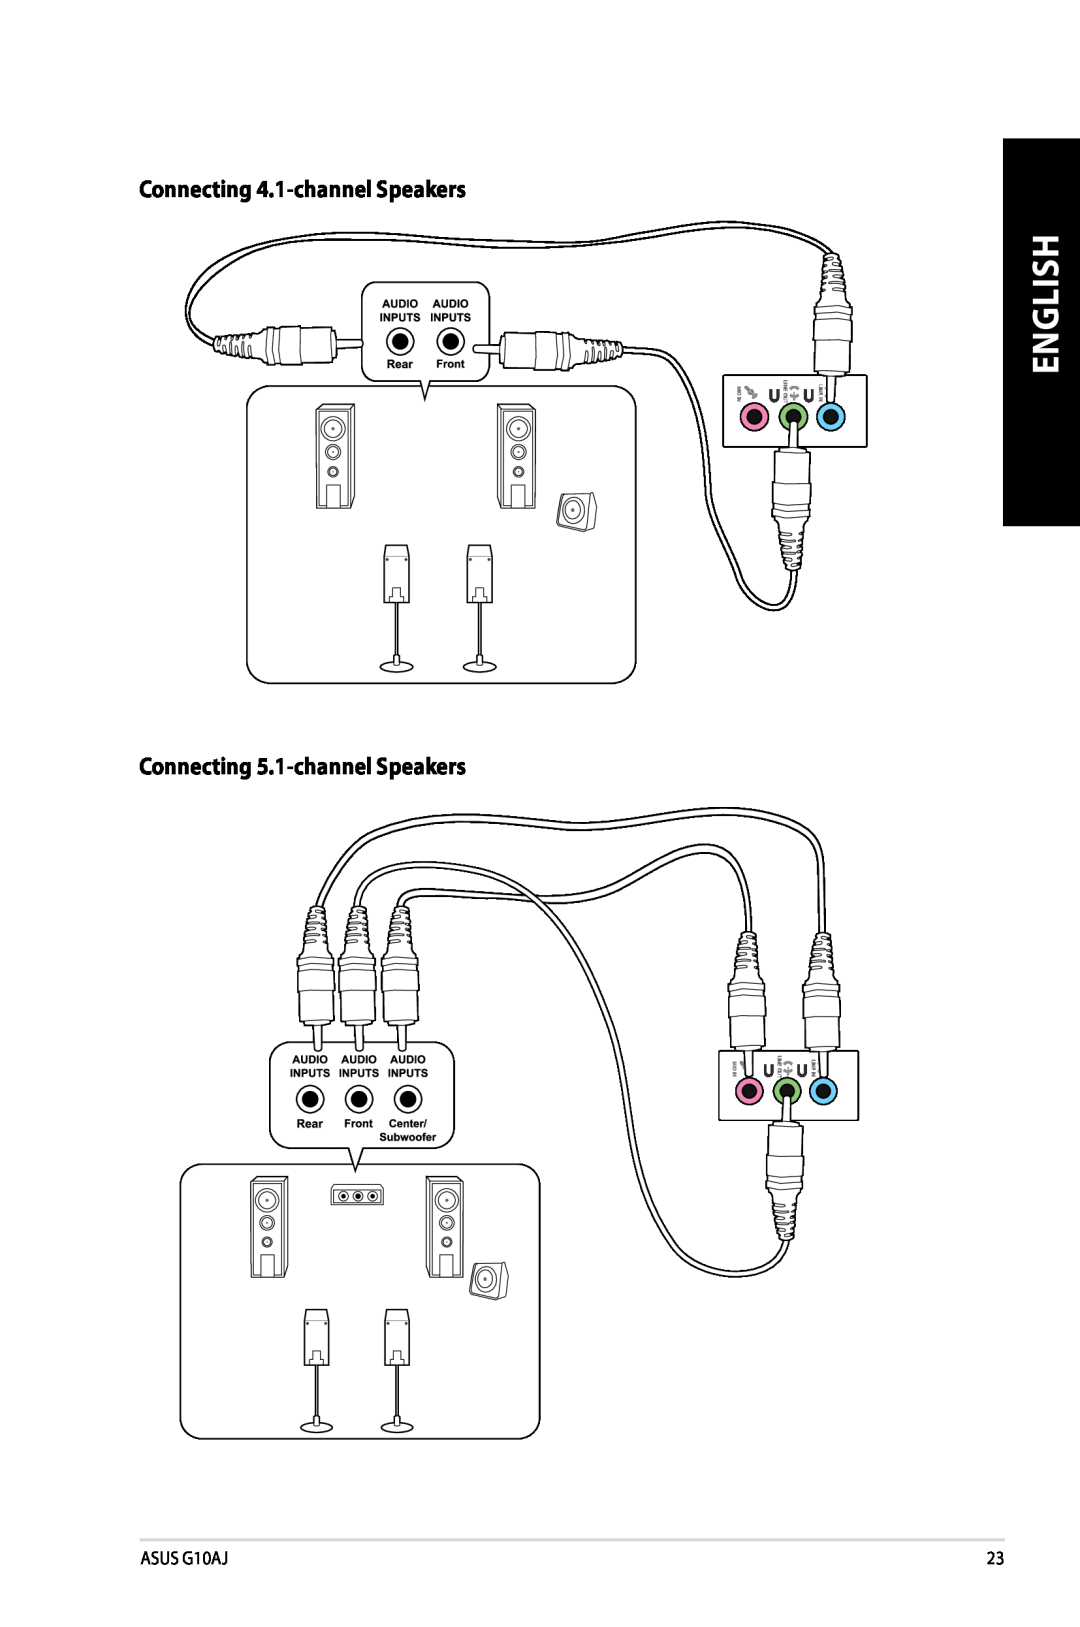 Asus G10AJ manual Connecting 4.1-channel Speakers, Connecting 5.1-channel Speakers, English, T Line Ou 